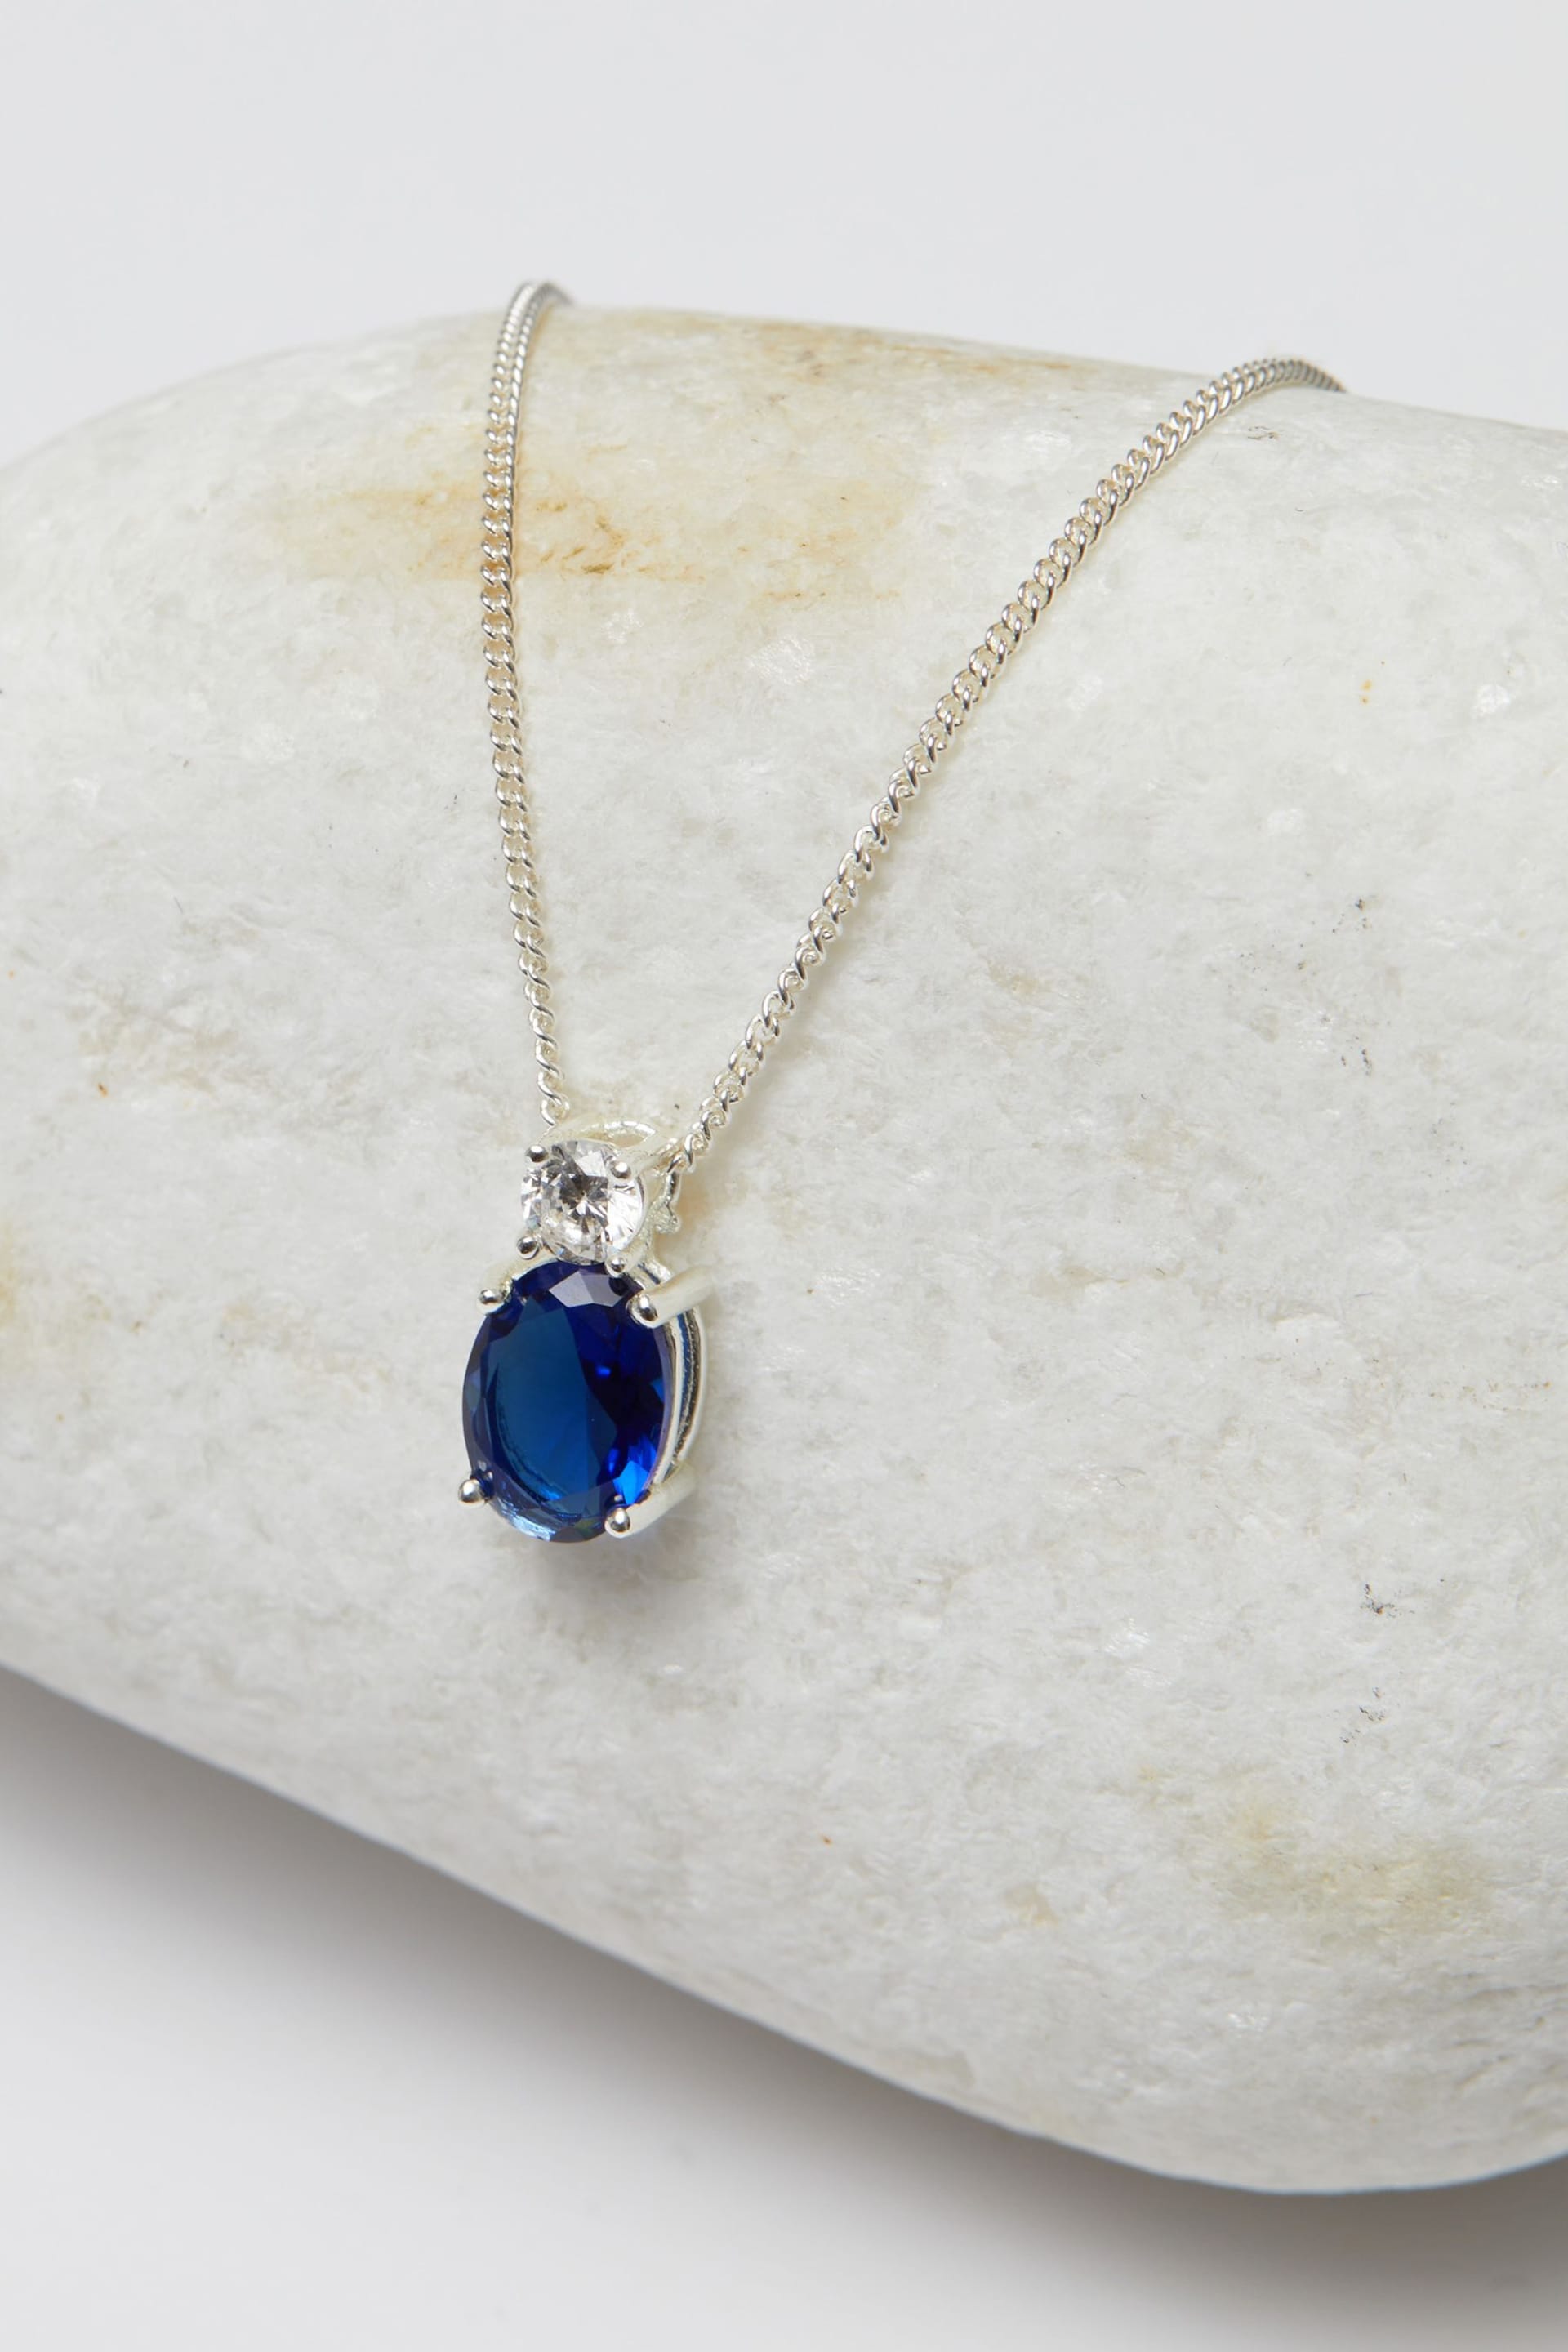 Simply Silver Silver Mini Sapphire Cubic Zirconia Pendant Necklace - Image 3 of 3